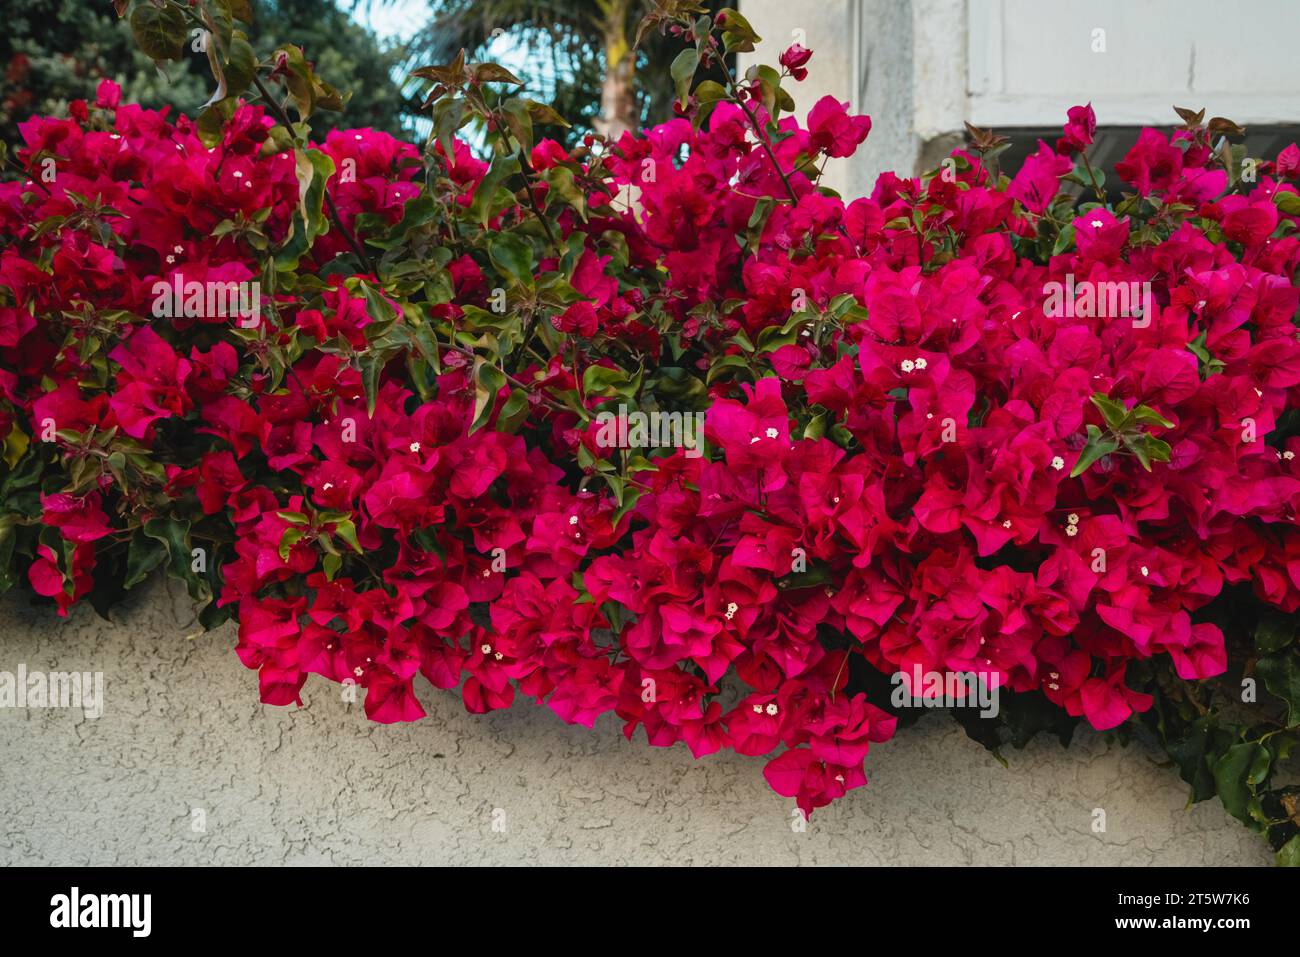 Bougainvillea vines cascade down a house wall. Colorful ornamental vines in full bloom close-up Stock Photo